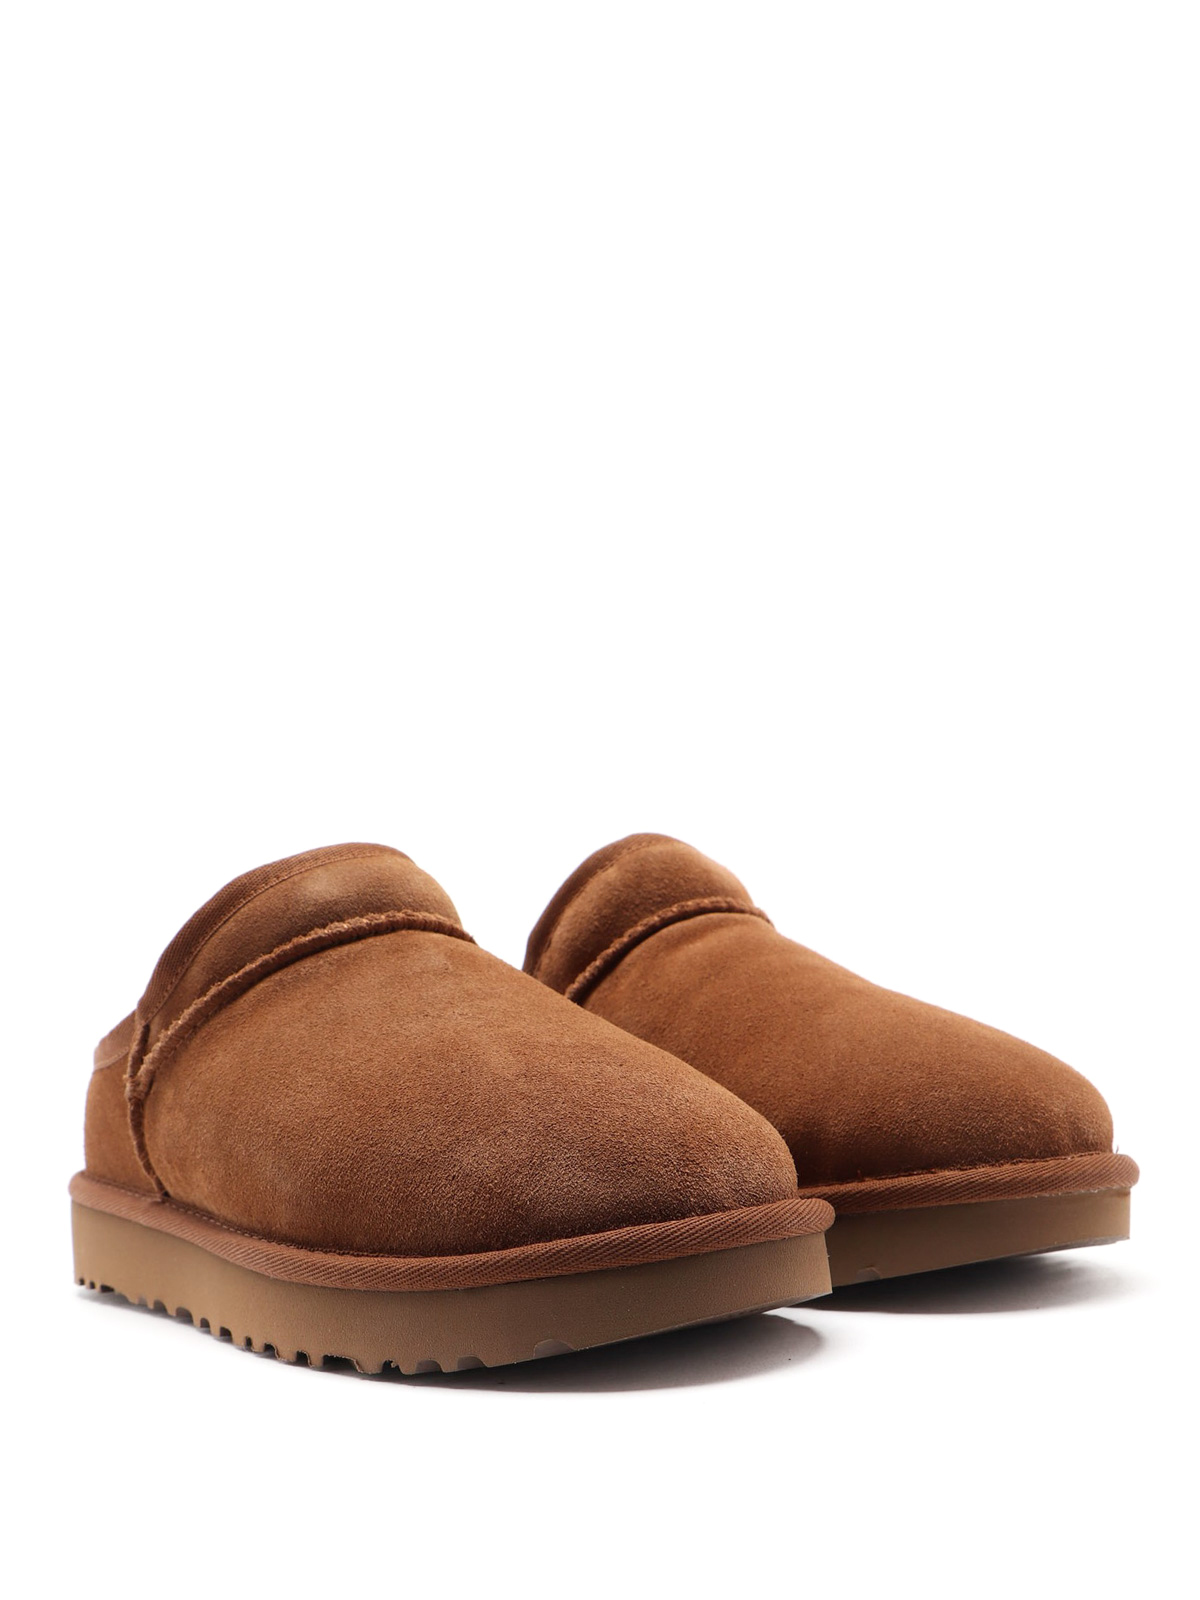 Ugg - Shearling and suede slippers 